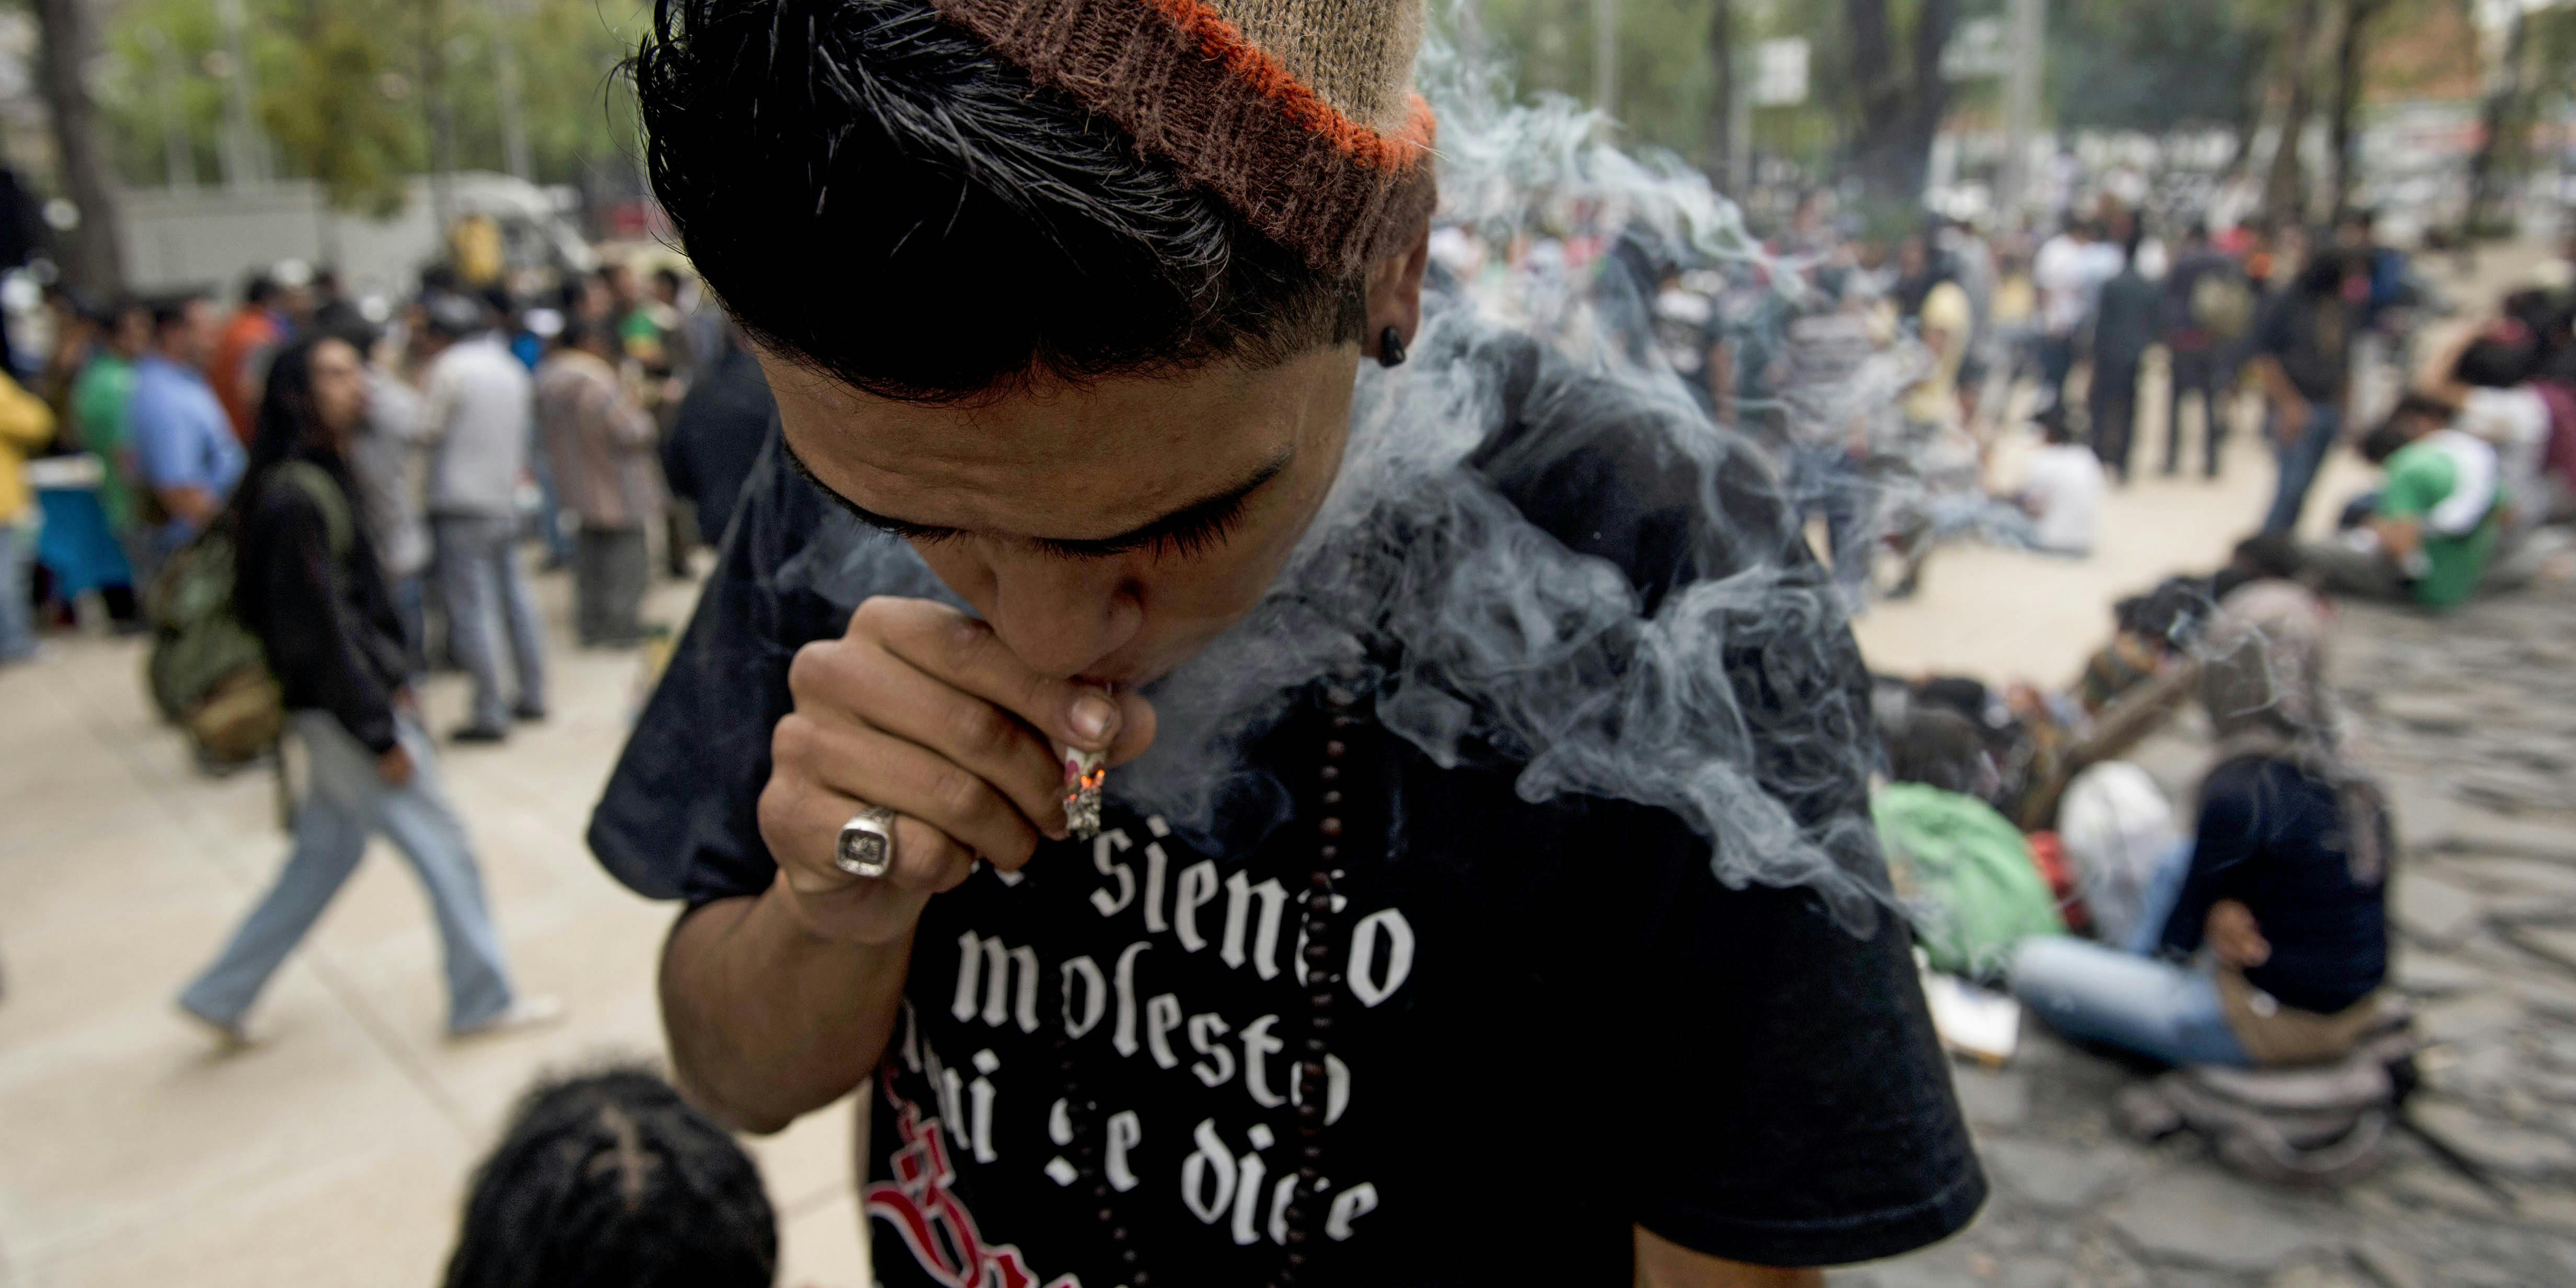 A man smokes cannabis during the "Marijuana Festival" in front of the building of the Mexican Senate. Mexico's supreme court rules cannabis prohibition unconstitutional.